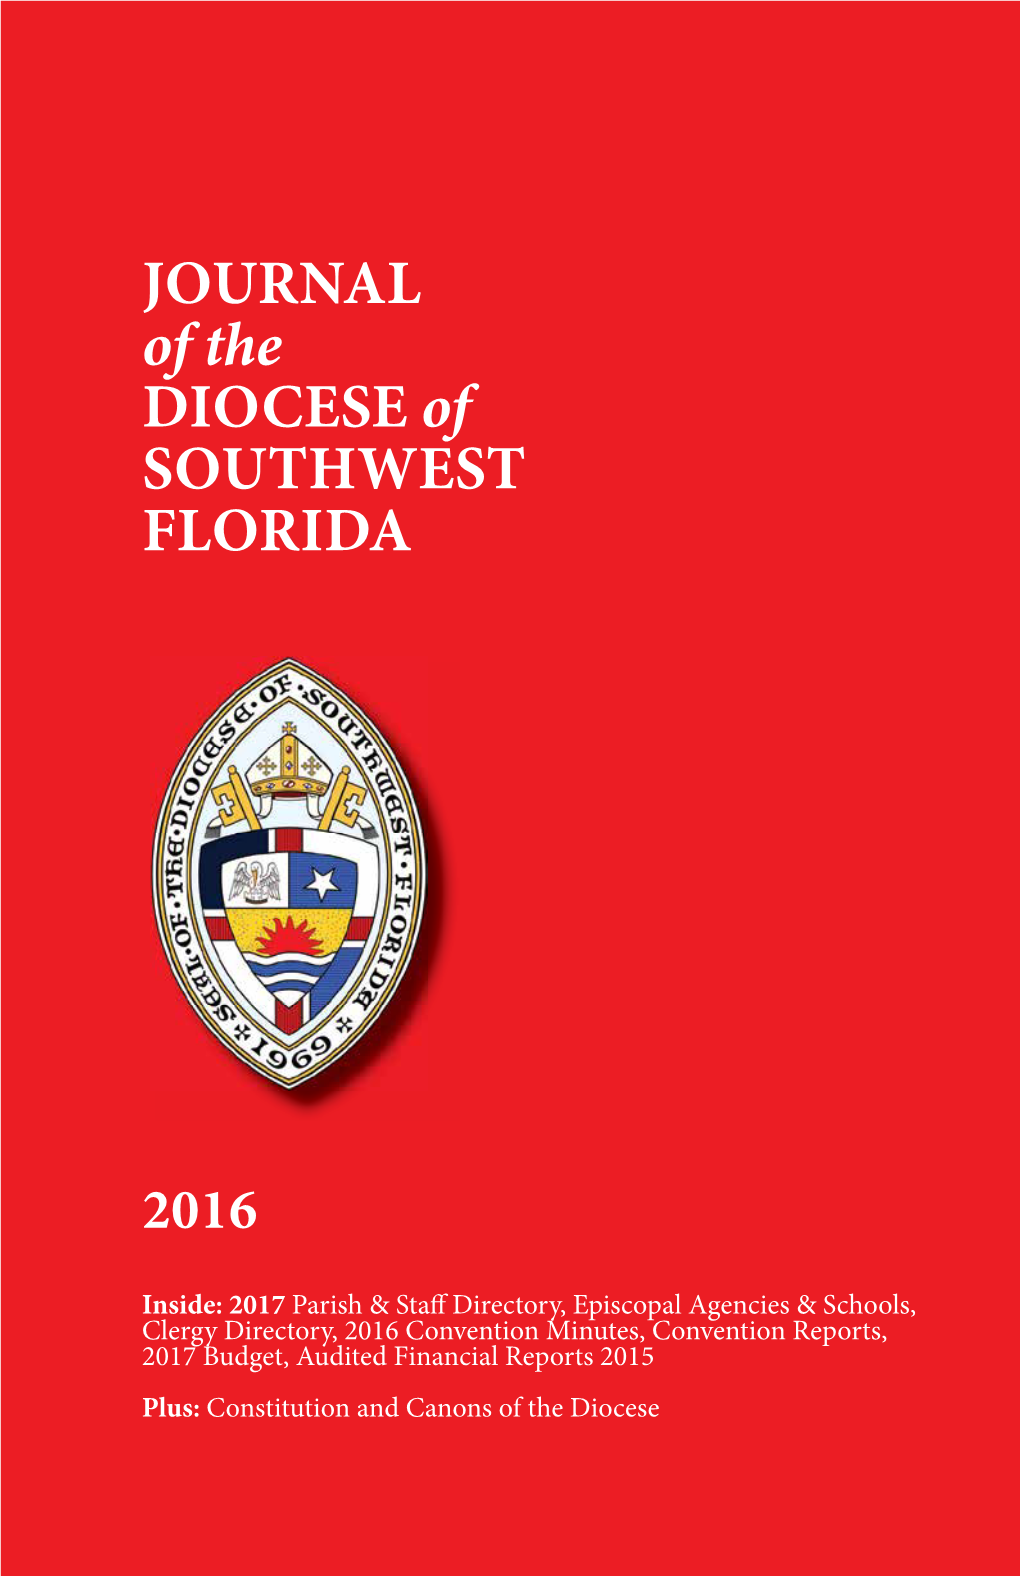 JOURNAL of the DIOCESE of SOUTHWEST FLORIDA